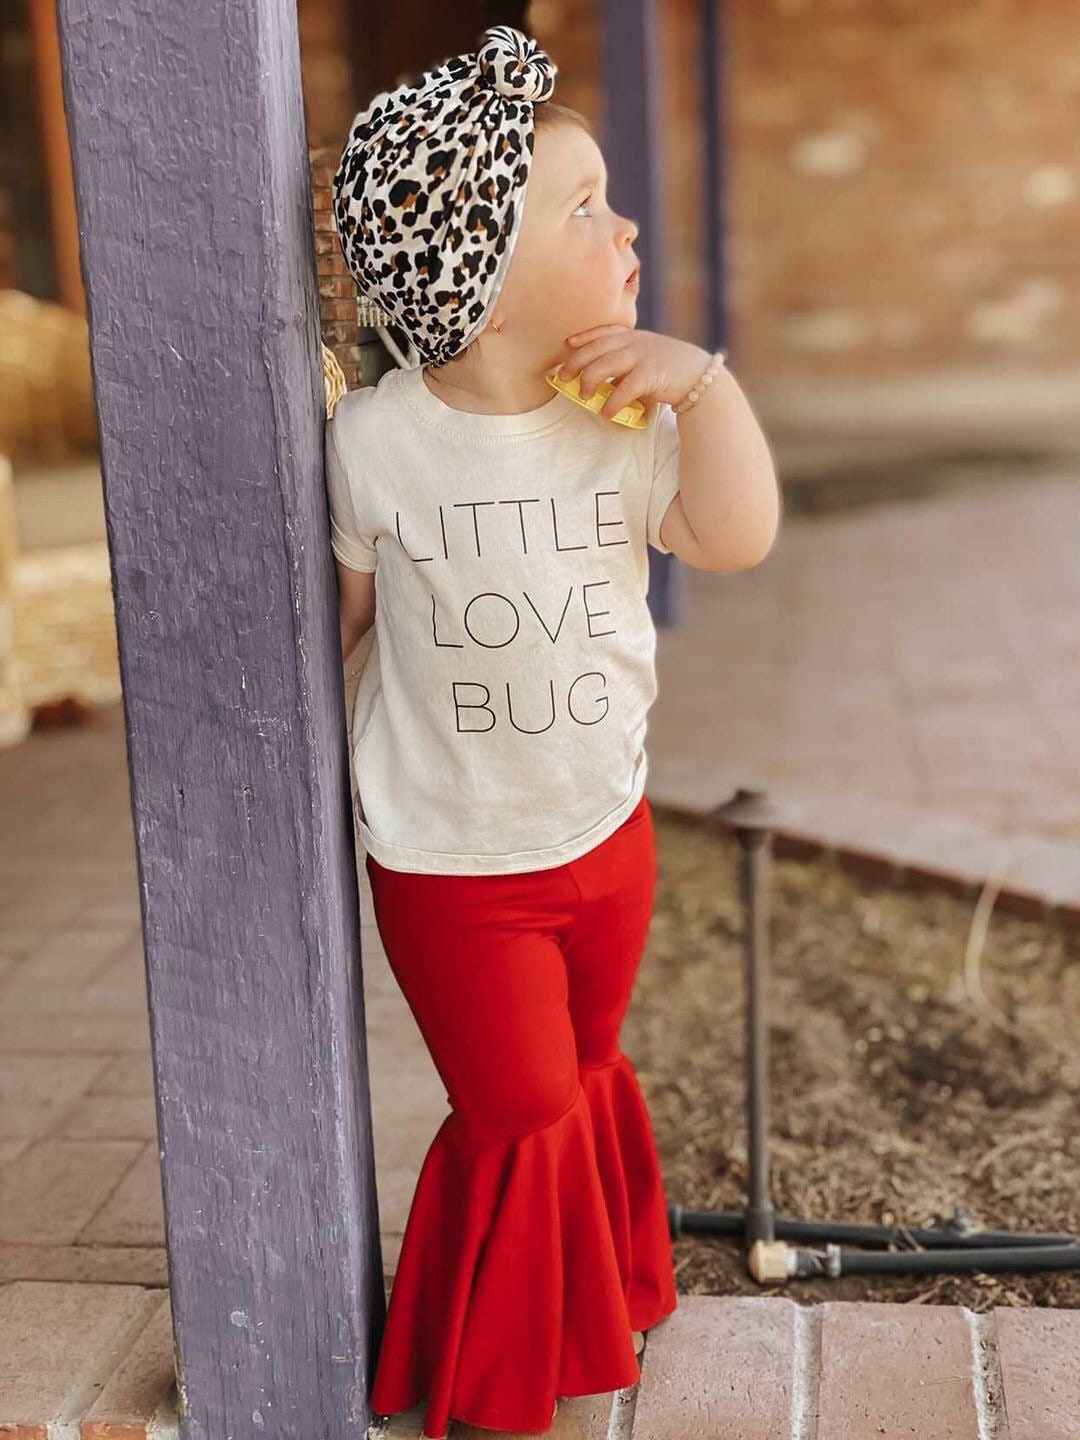 Milk Silk Toddler Outfits For Girls, Short Sleeve Bell Bottom Pants Fashion  Boutique Clothing Sets From Babyclothingboutique, $7.99 | DHgate.Com